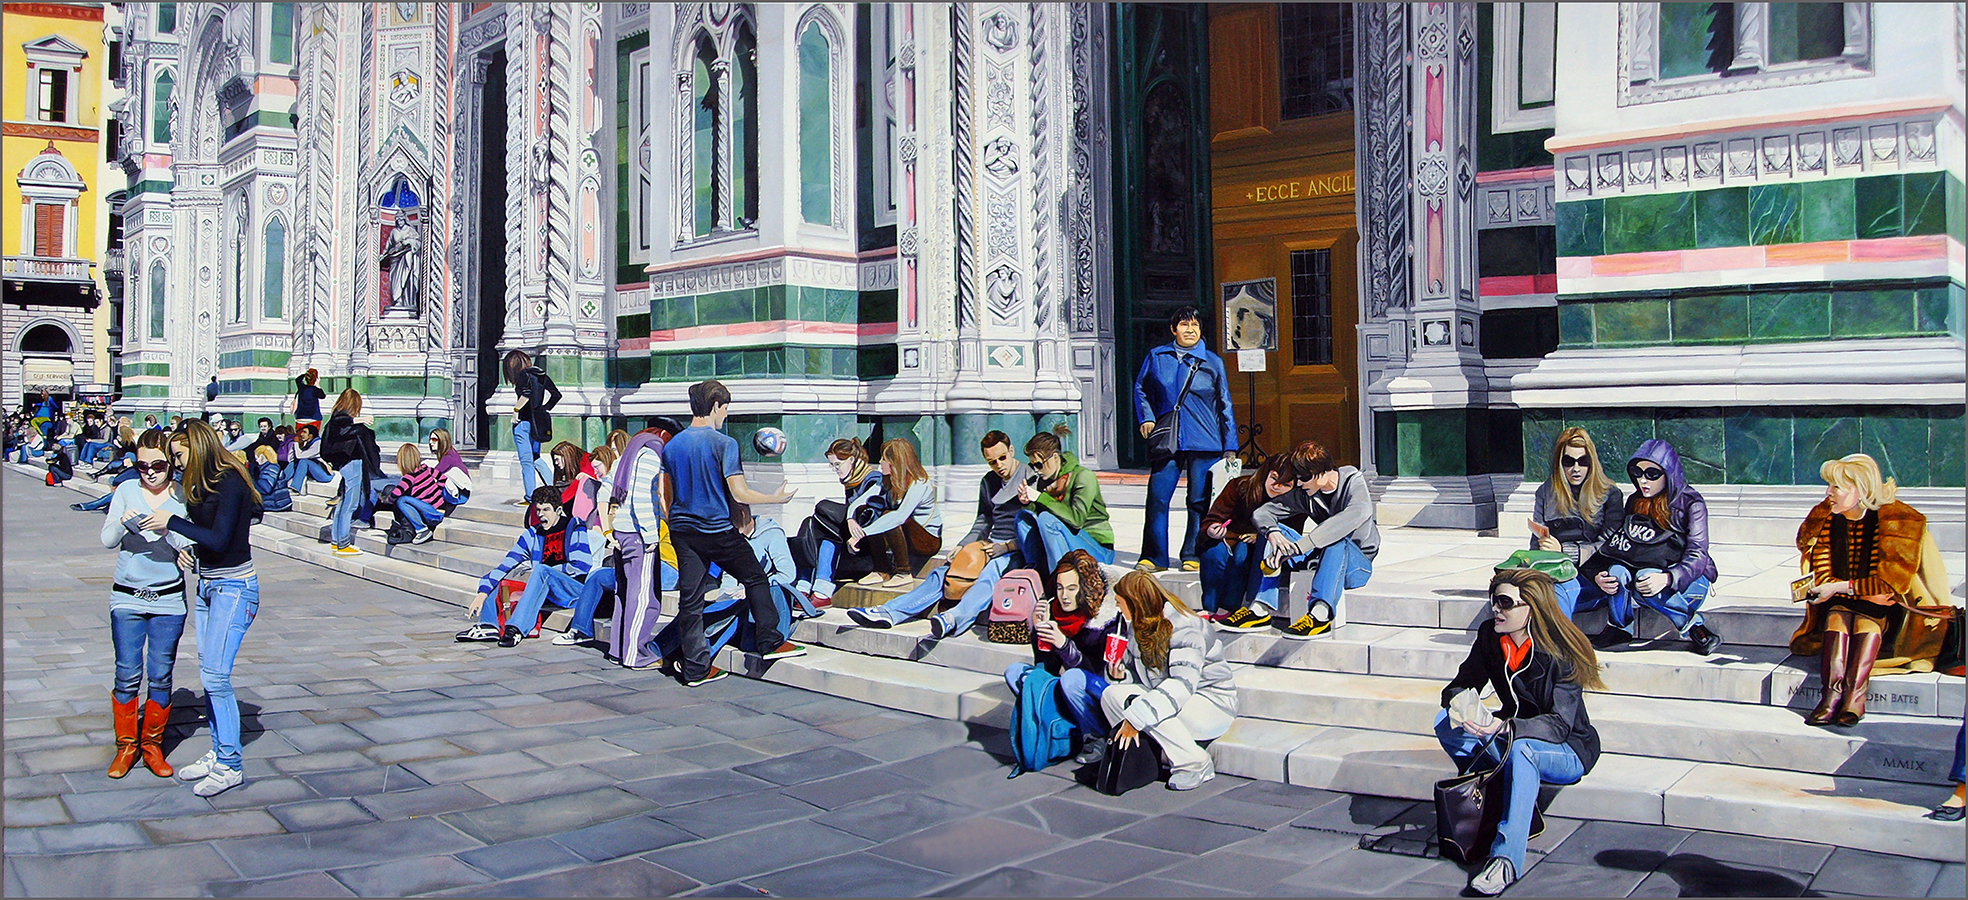 "Sitting on the Steps of the Duomo" an original oil painting by Matthew Holden Bates